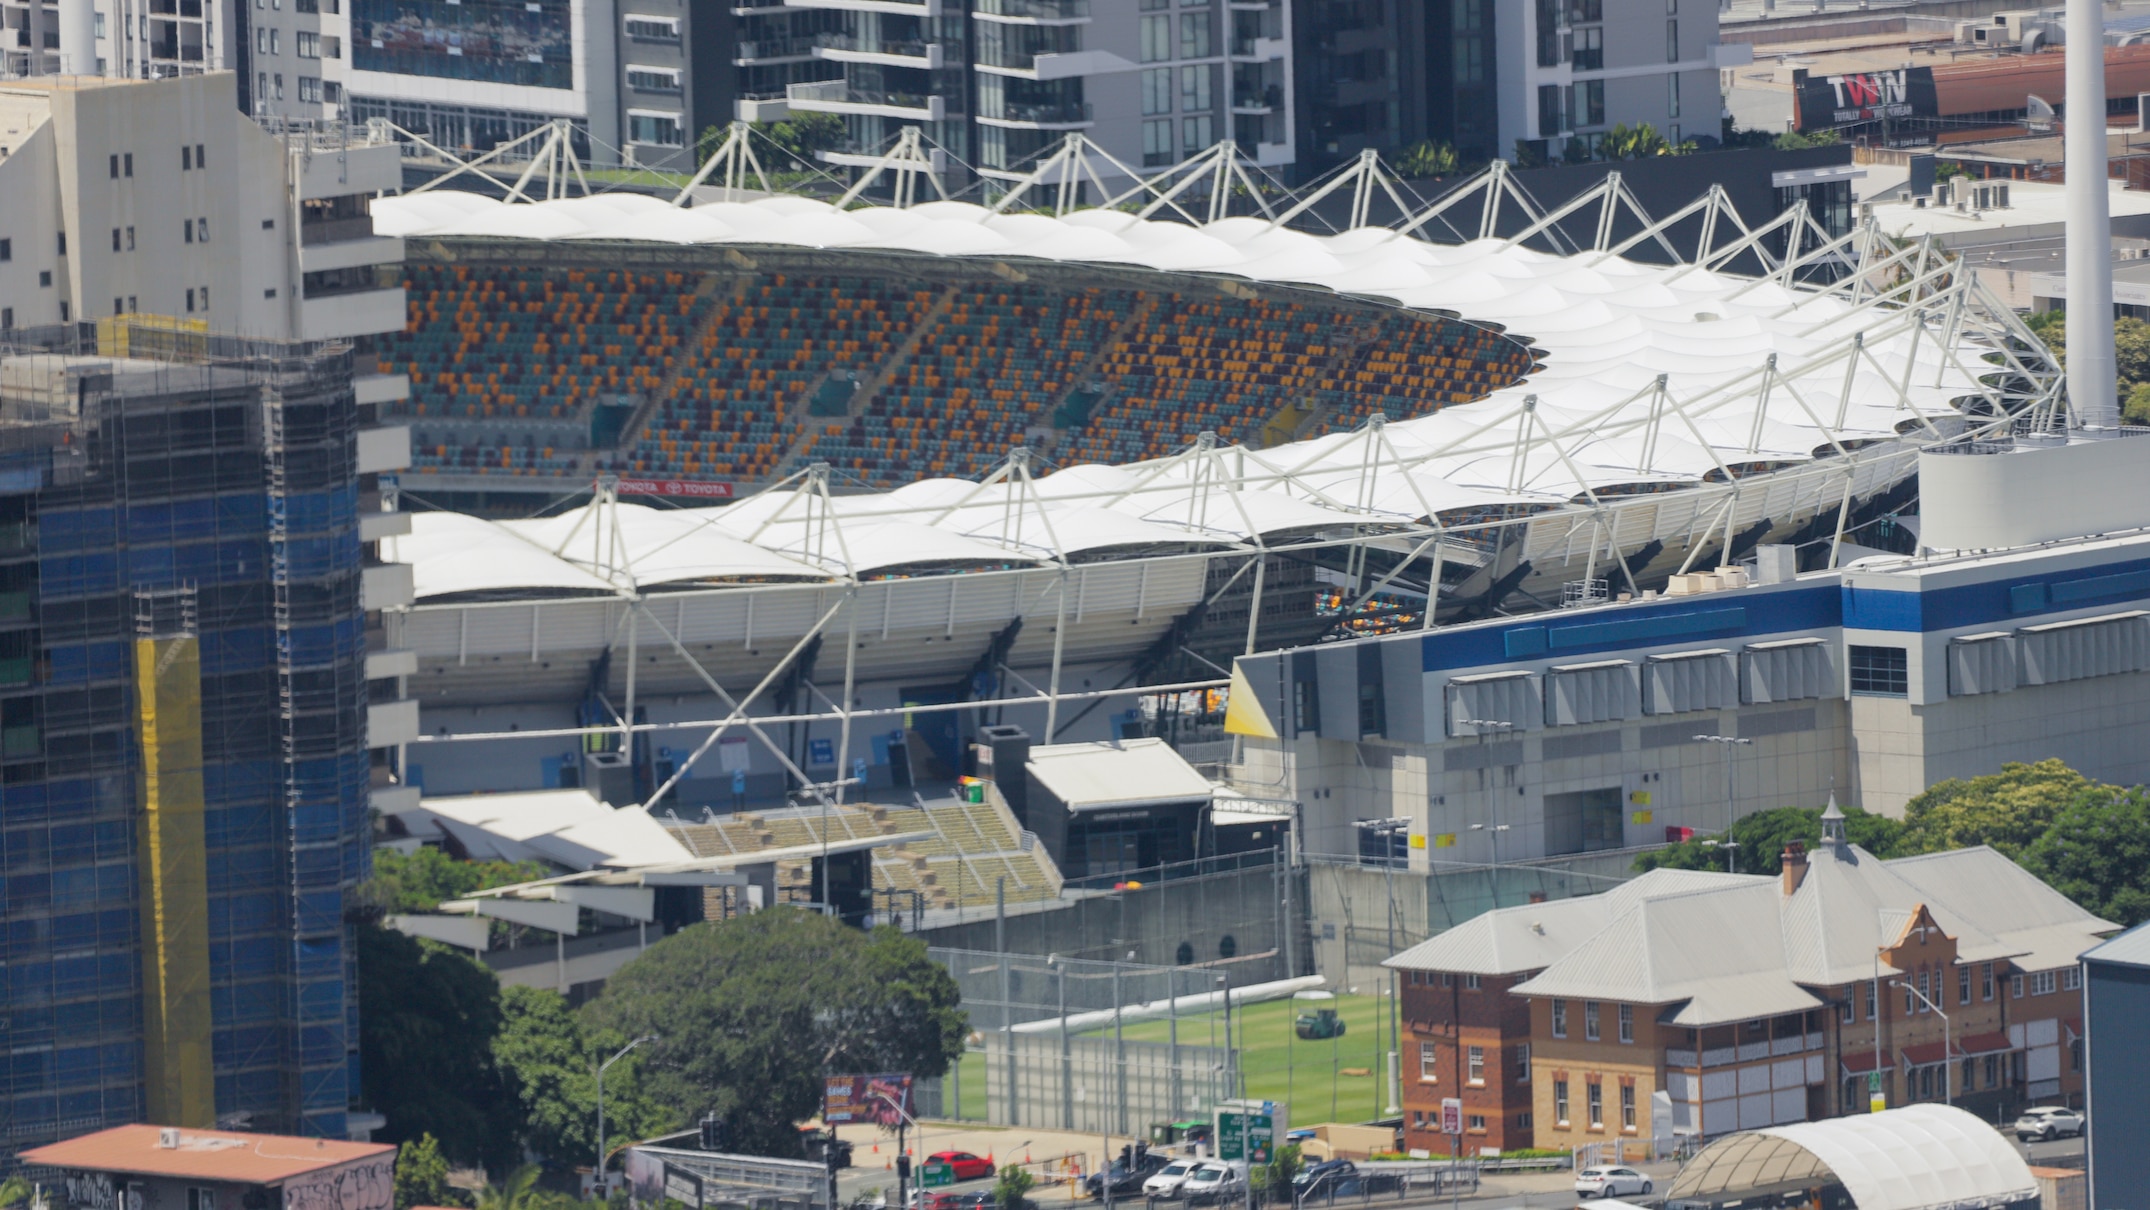 queensland government yet to begin promised 60-day review of olympic games infrastructure